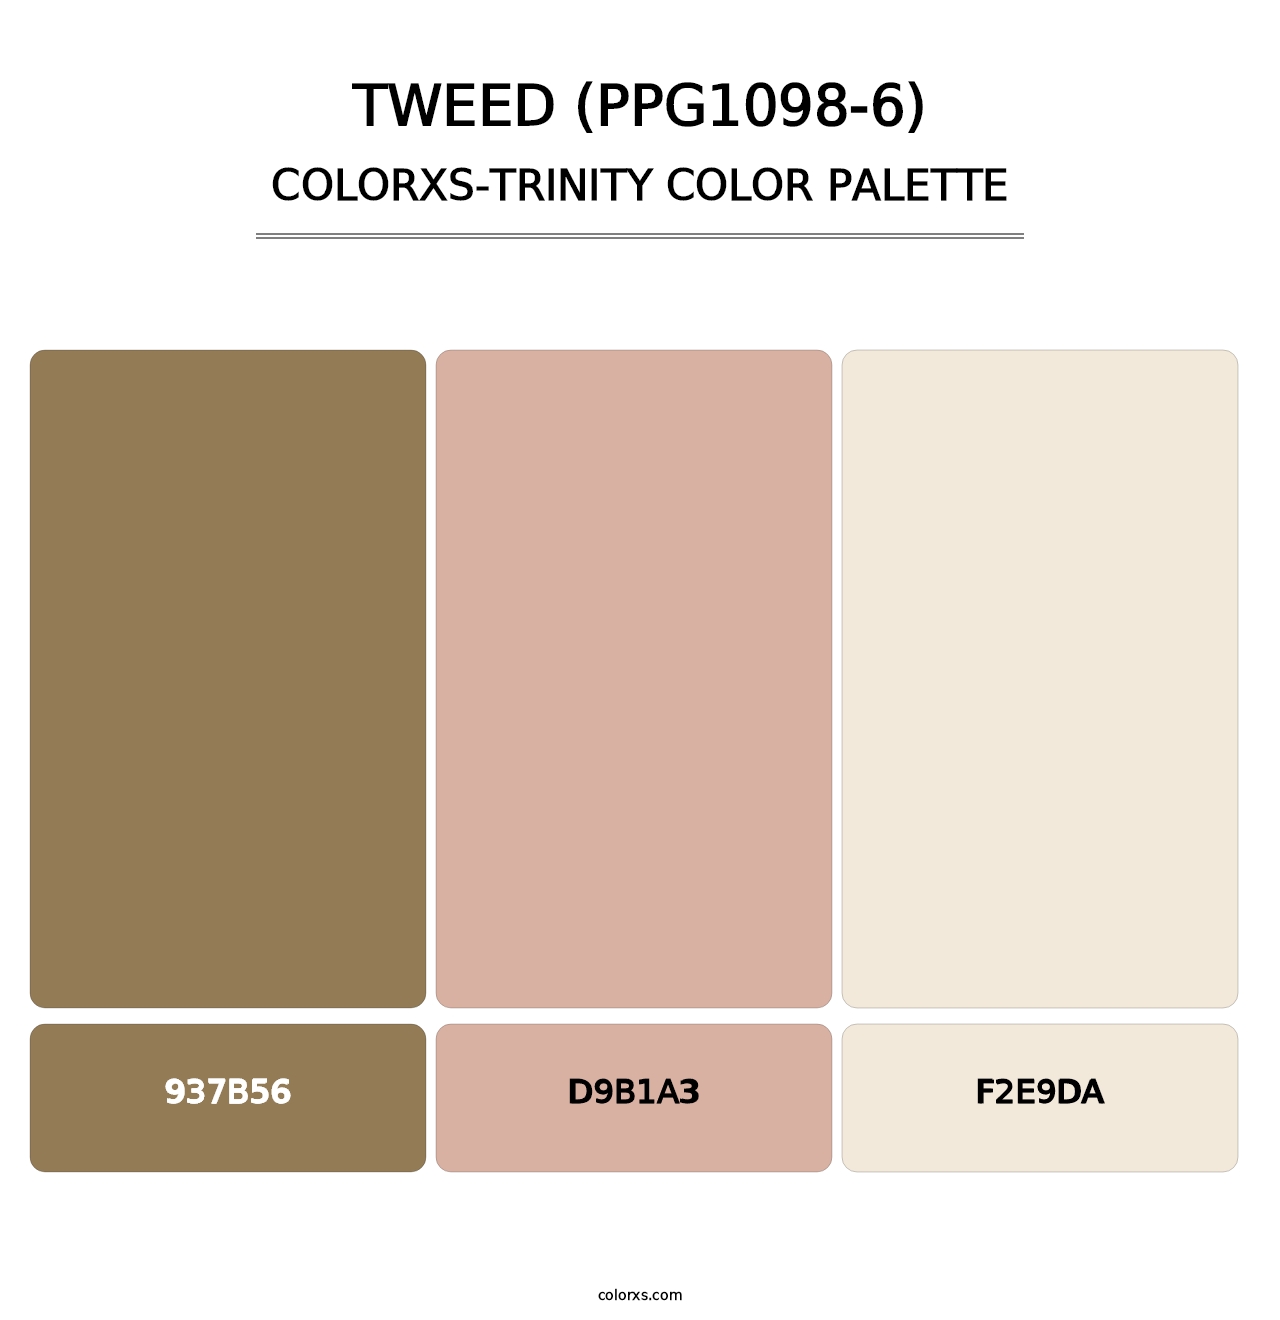 Tweed (PPG1098-6) - Colorxs Trinity Palette